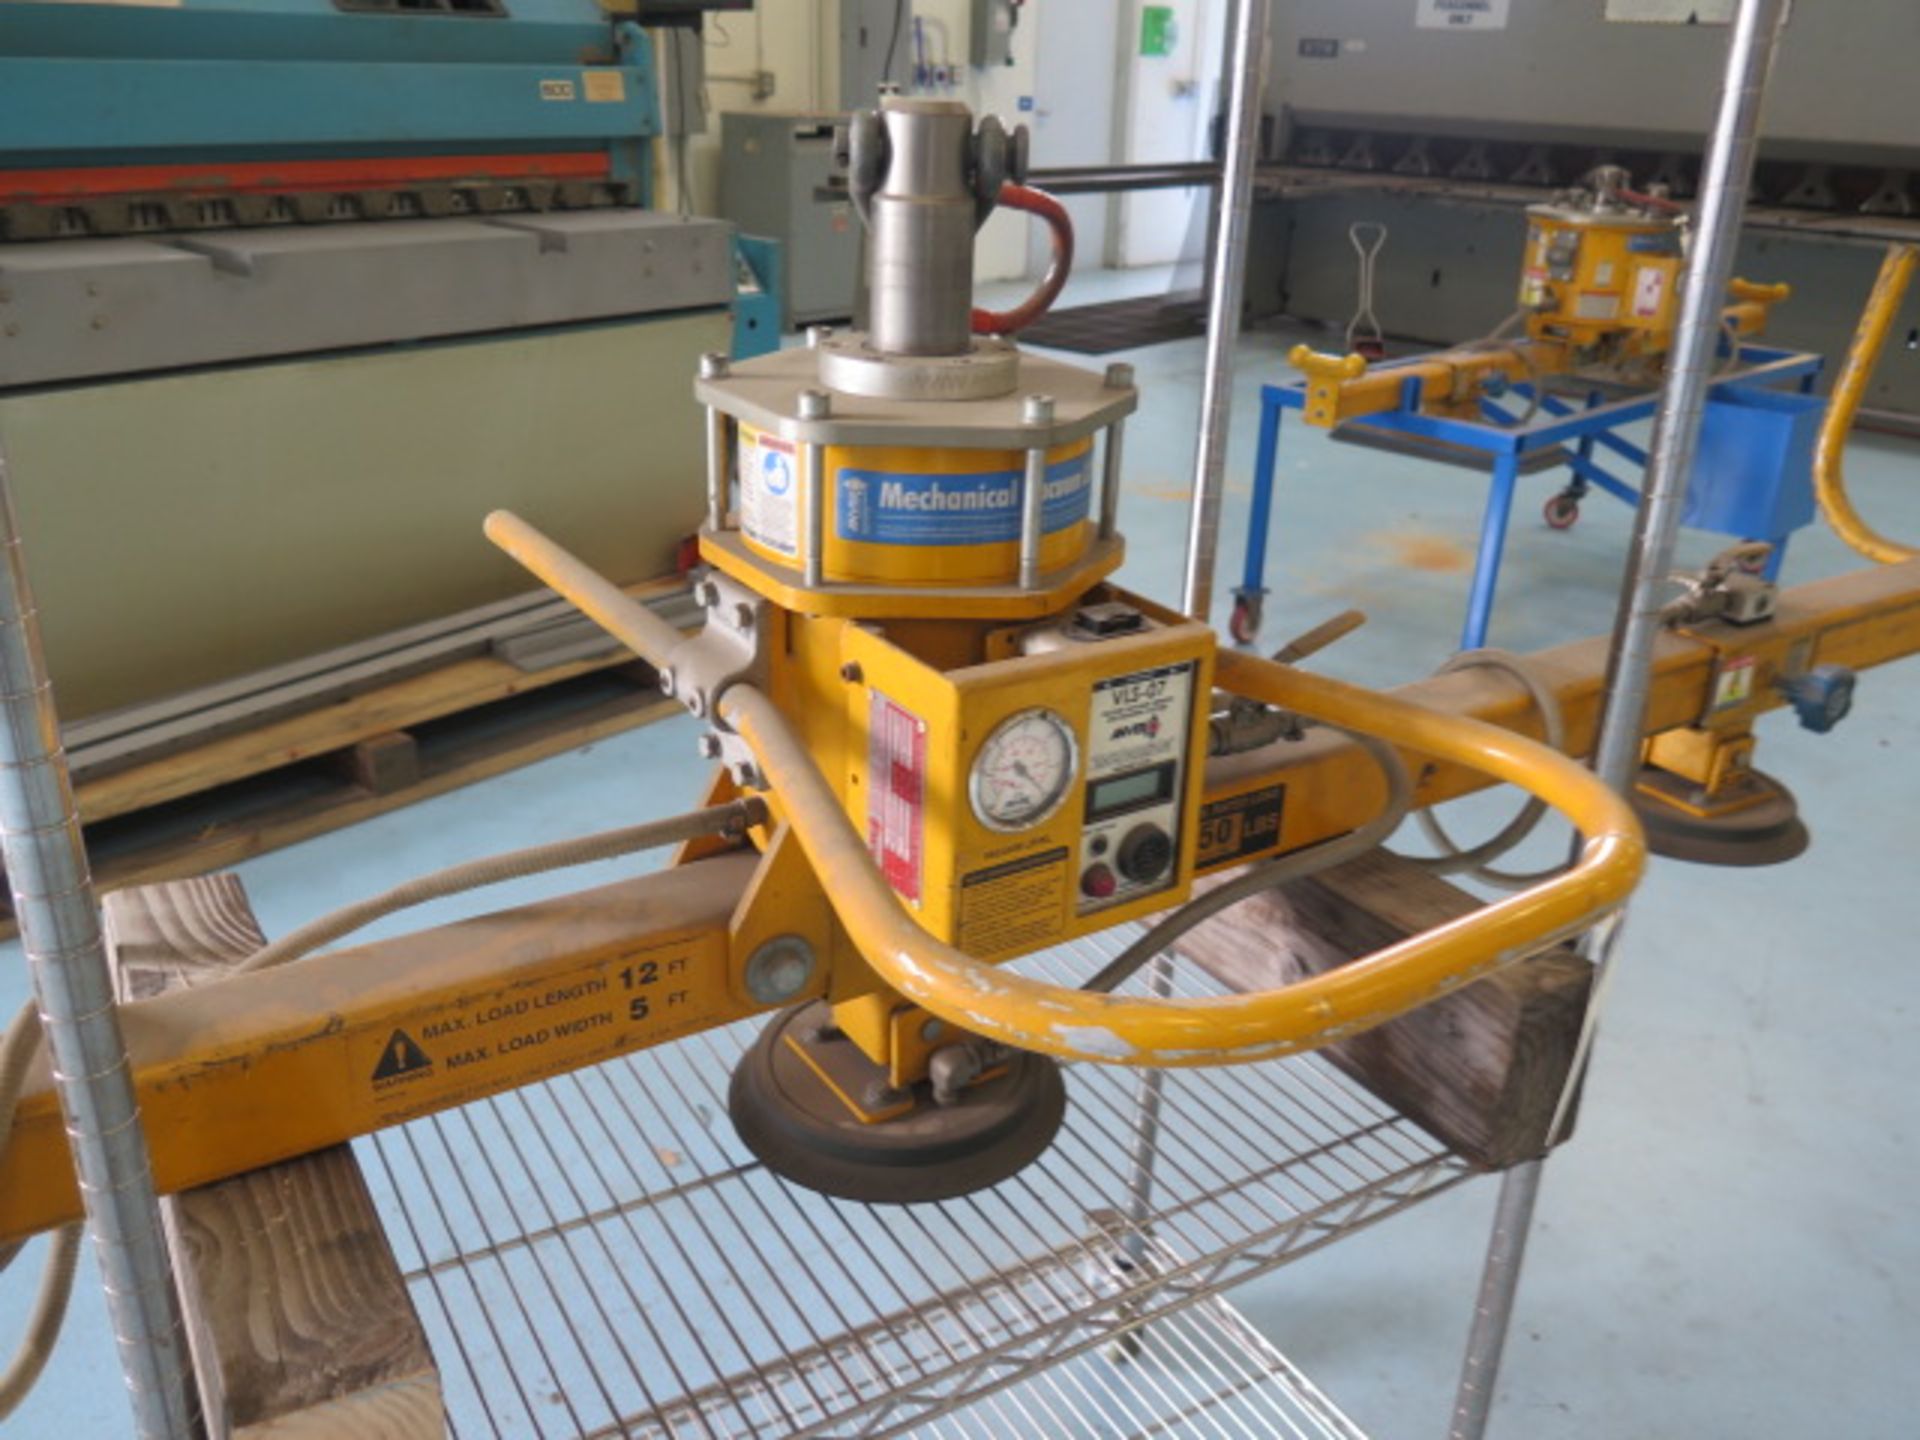 2008 Anver mdl. M100M-L3P/6P W/L75M3-110 750 Lb Cap Mechanical Vacuum Lifter s/n S0080001472 w/ - Image 2 of 7